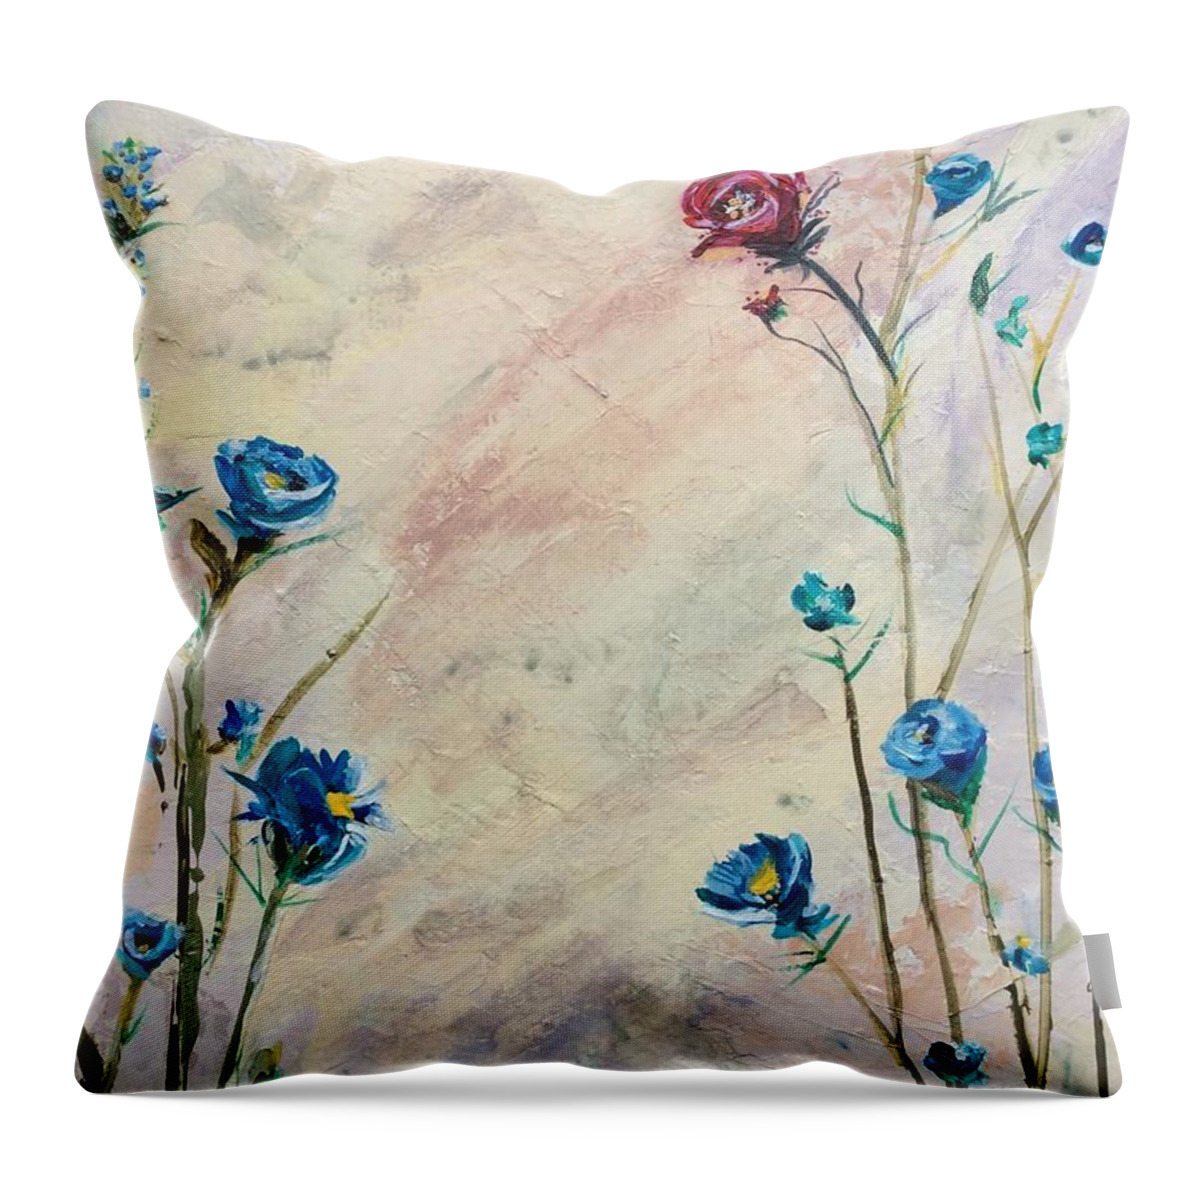 Abstract Flowers Throw Pillow featuring the painting Against All Odds by Deborah Naves